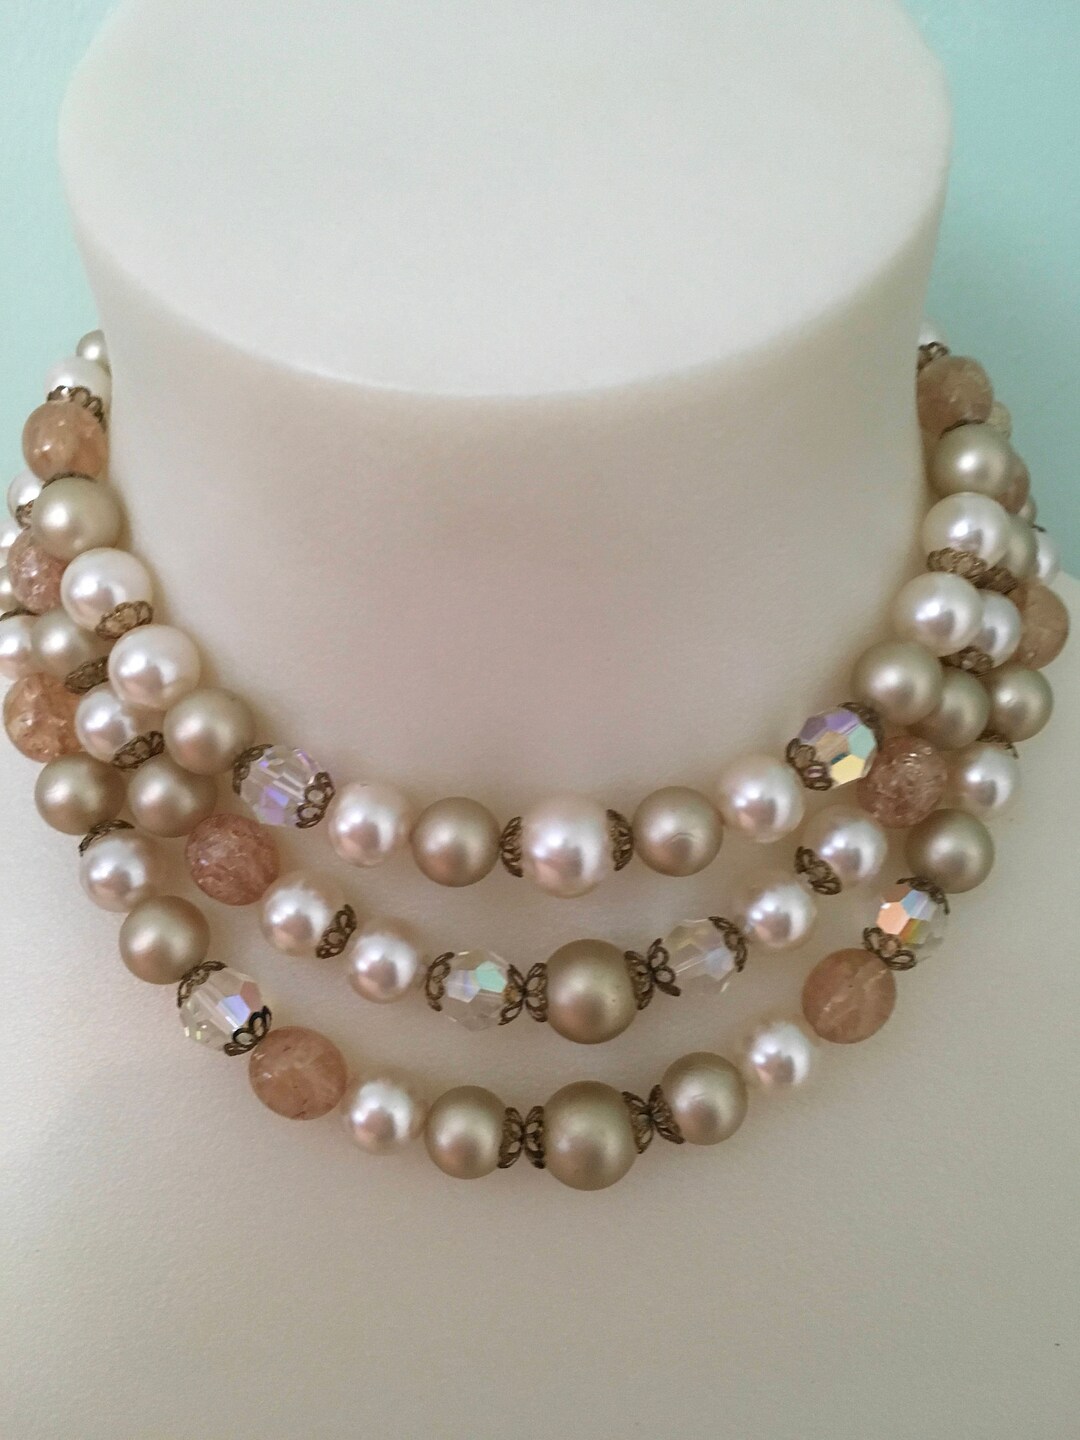 Vintage 1950s Champagne Colored Lucite Beaded Necklace - Etsy